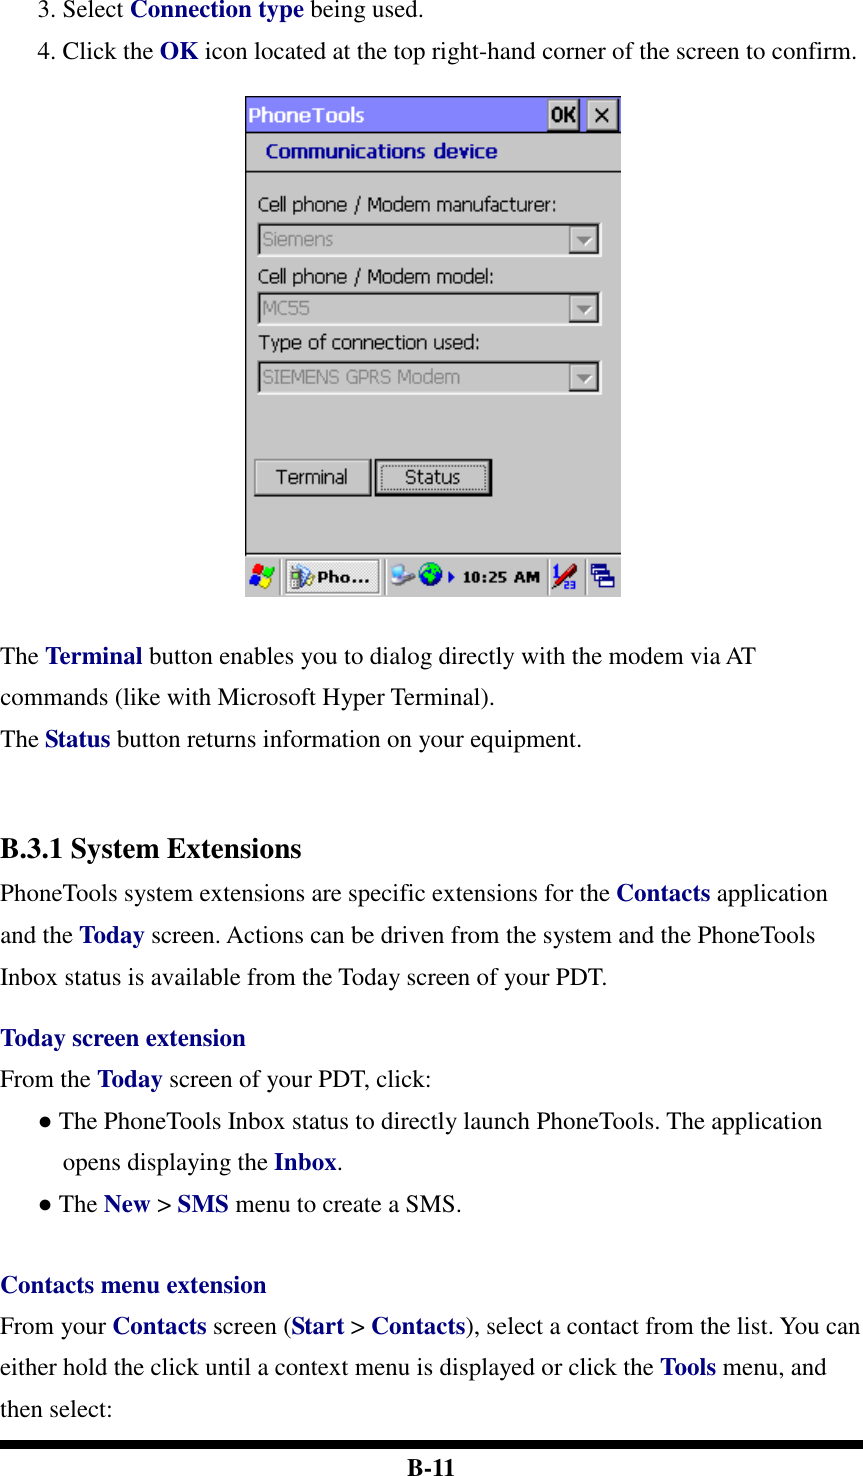  B-11 3. Select Connection type being used.   4. Click the OK icon located at the top right-hand corner of the screen to confirm.    The Terminal button enables you to dialog directly with the modem via AT commands (like with Microsoft Hyper Terminal).   The Status button returns information on your equipment.   B.3.1 System Extensions PhoneTools system extensions are specific extensions for the Contacts application and the Today screen. Actions can be driven from the system and the PhoneTools Inbox status is available from the Today screen of your PDT.    Today screen extension From the Today screen of your PDT, click: ● The PhoneTools Inbox status to directly launch PhoneTools. The application opens displaying the Inbox. ● The New &gt; SMS menu to create a SMS.     Contacts menu extension From your Contacts screen (Start &gt; Contacts), select a contact from the list. You can either hold the click until a context menu is displayed or click the Tools menu, and then select: 